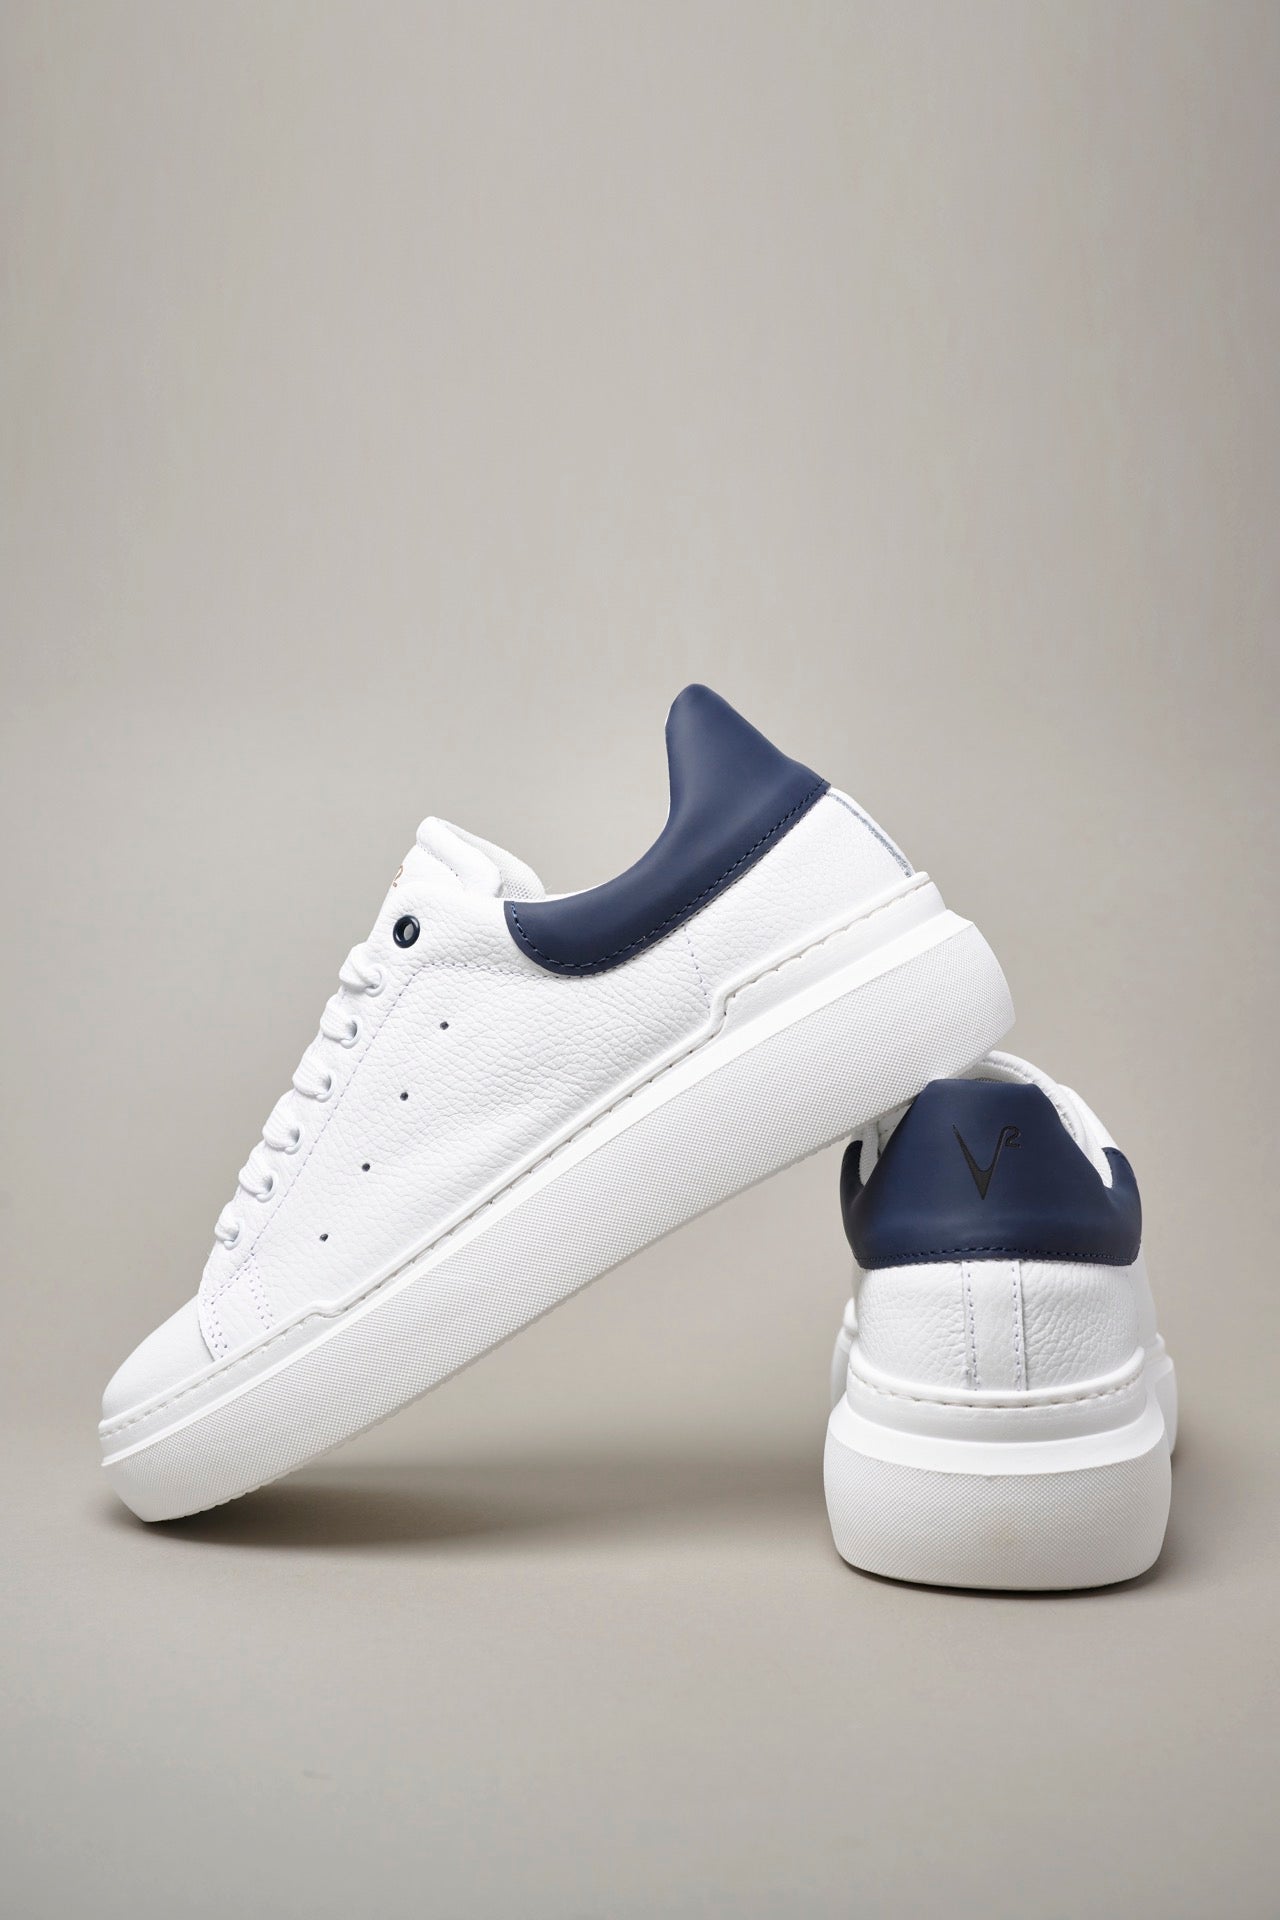 HAMMER - High sole sneakers in textured leather with Blue back